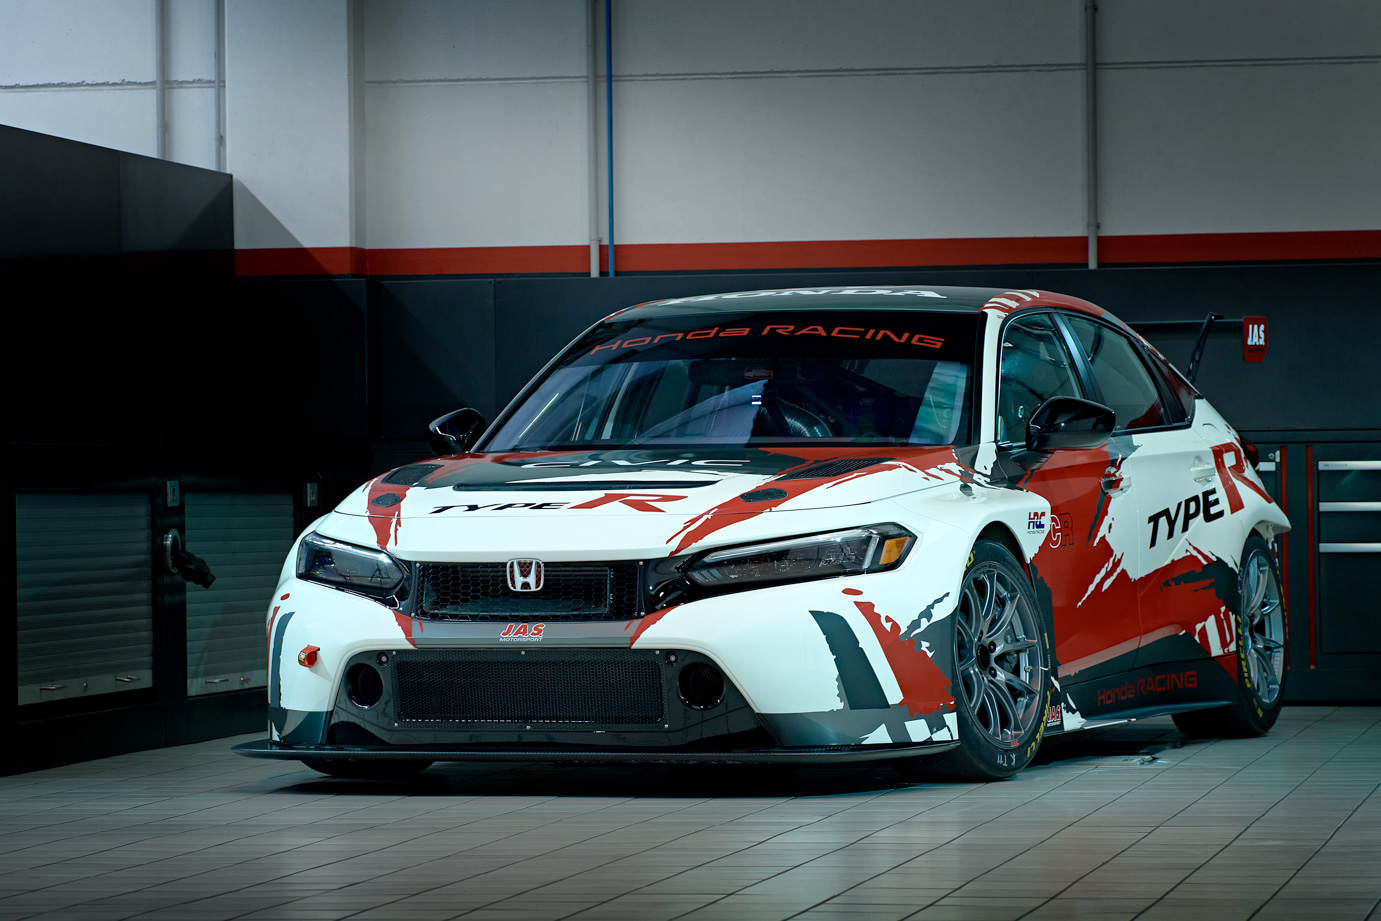 The Honda Civic Type R Race Car Is Getting Ready To Make Its IMSA Debut